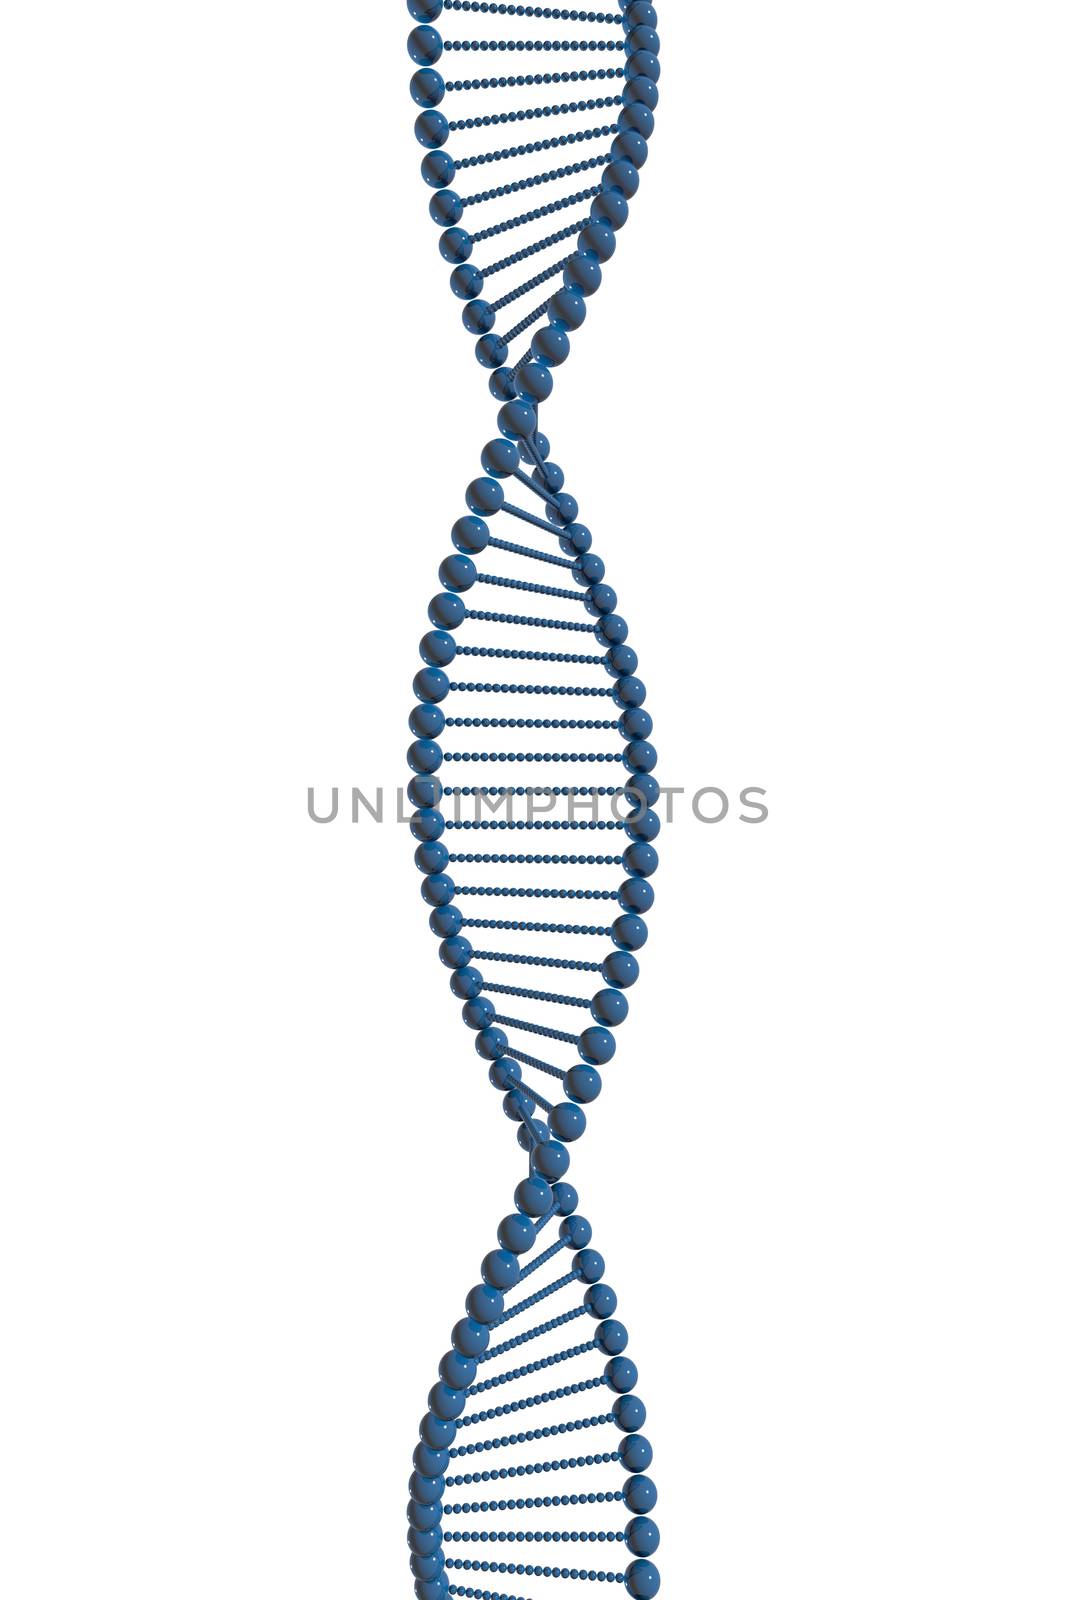 Isolated DNA strand on white background concept of science research